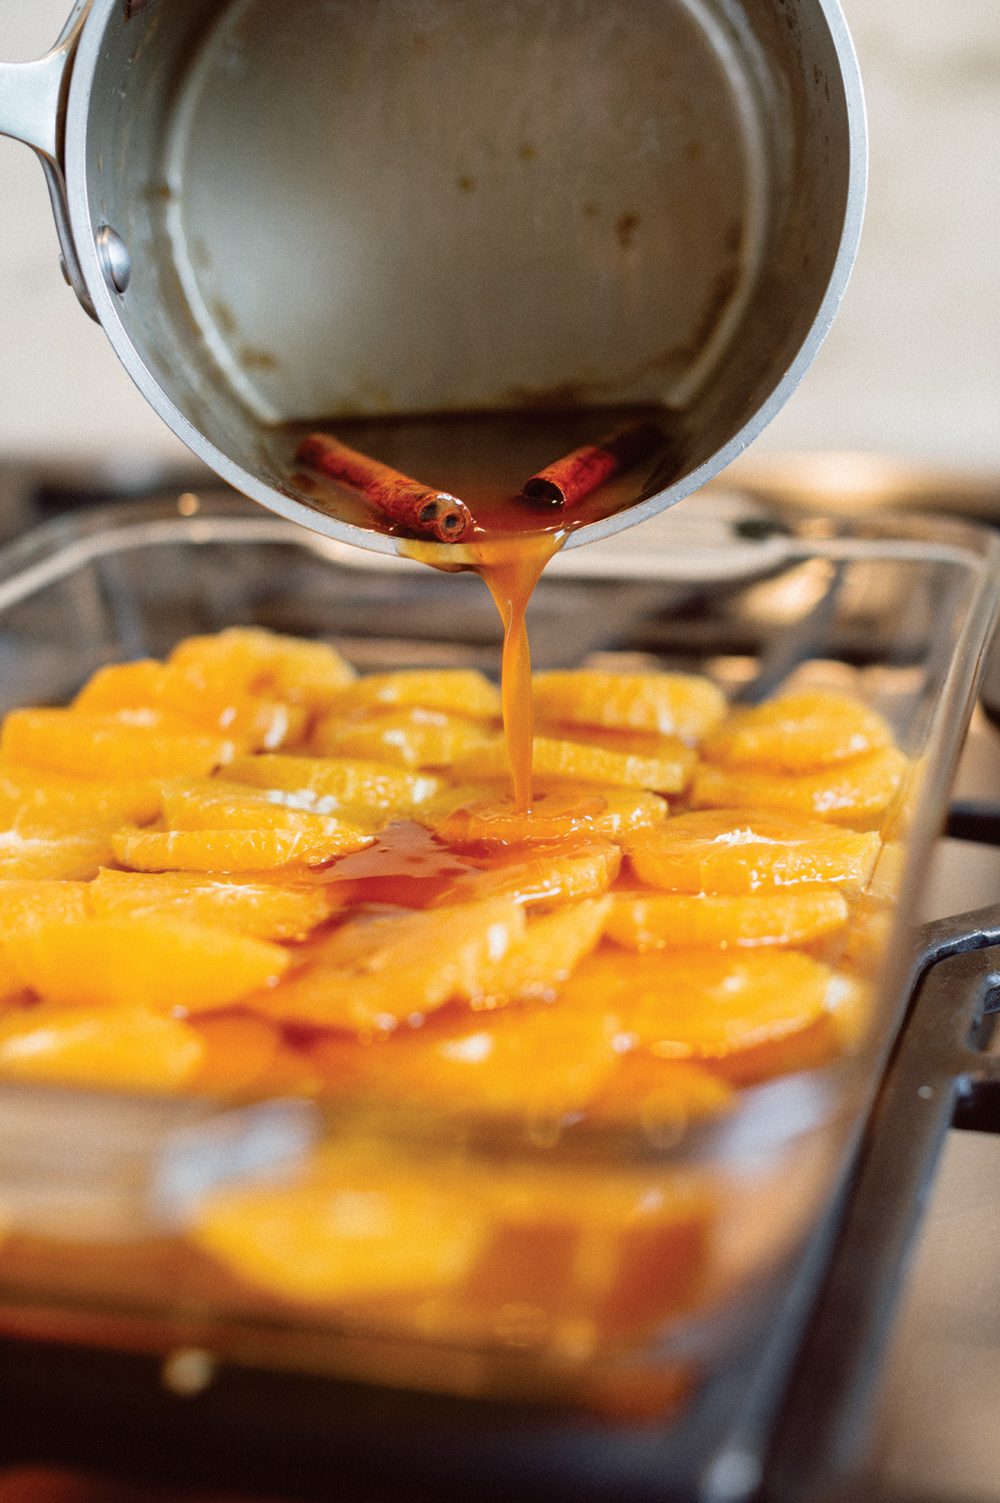 To give a classic caramel sauce an easy punch of flavor, substitute fresh orange juice for some or all of the water.